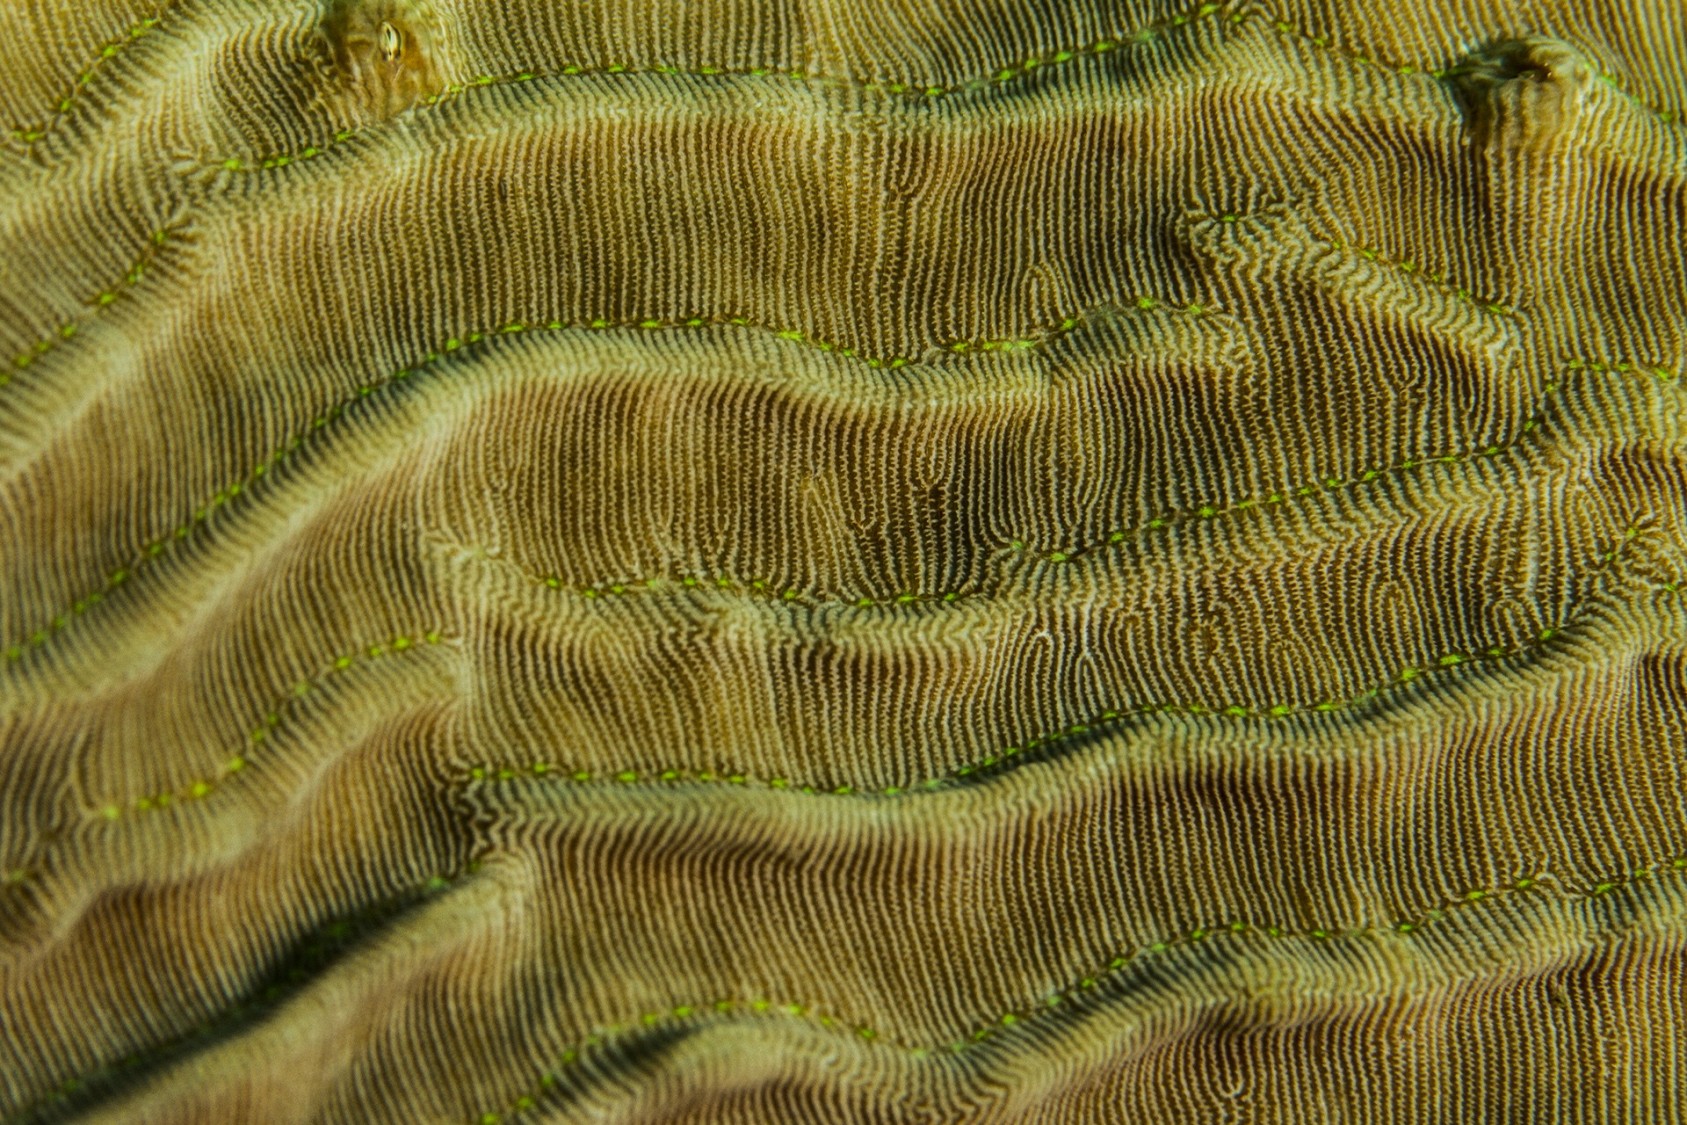 The Elephant Skin Coral is a stony coral with a wrinkled or ruffled surface that’s quite similar to an elephant’s skin, as its name suggests. The close-up reveals a lovely wavy pattern as well.